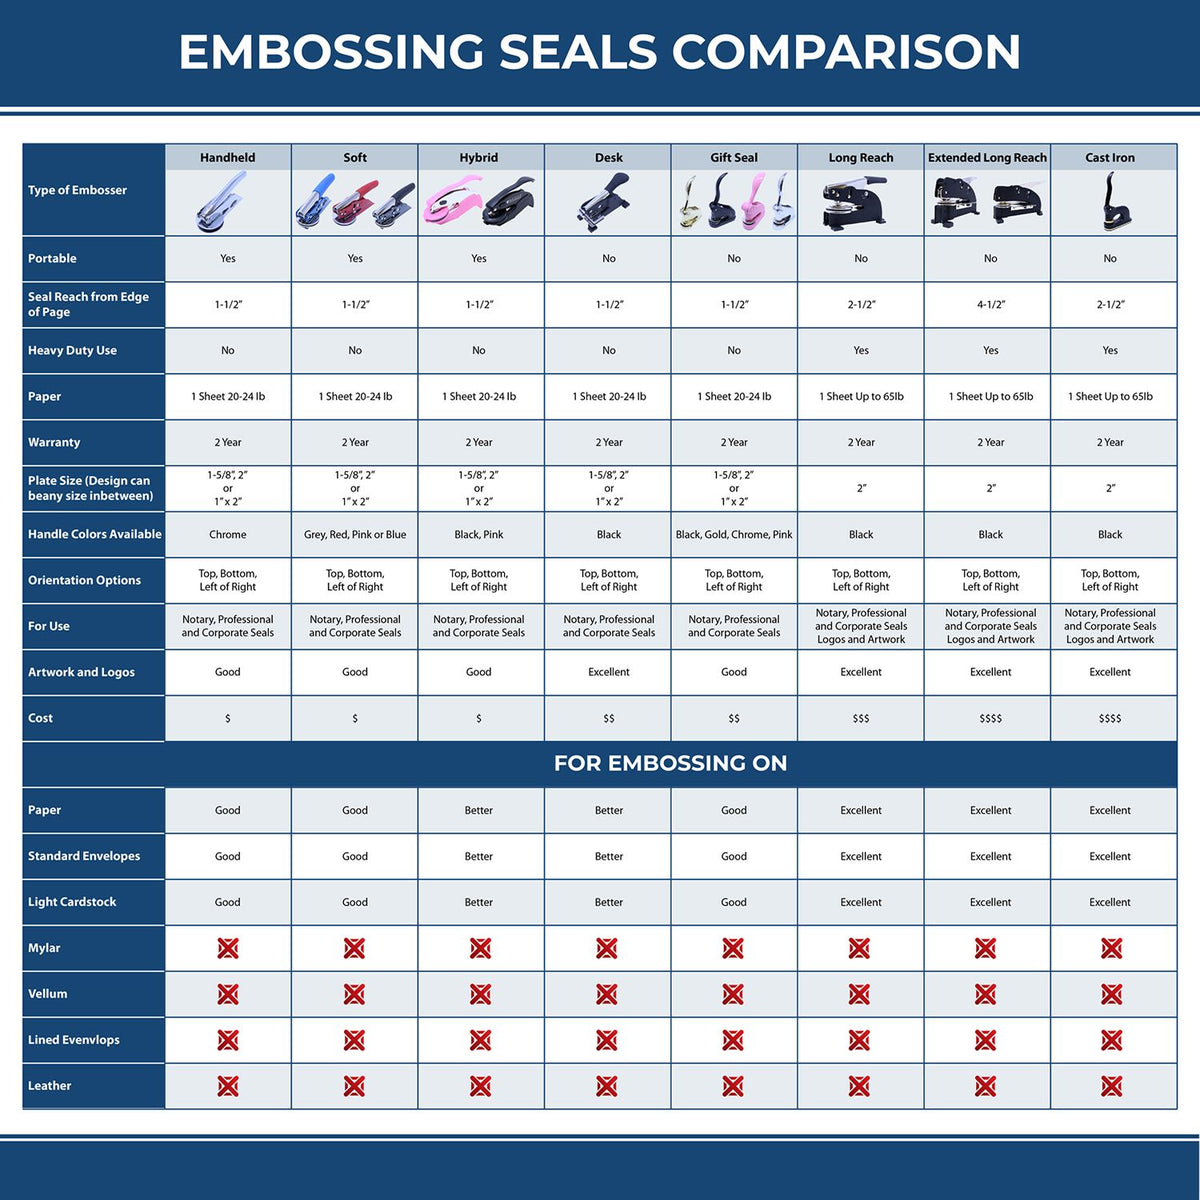 A comparison chart for the different types of mount models available for the Heavy Duty Cast Iron Utah Architect Embosser.